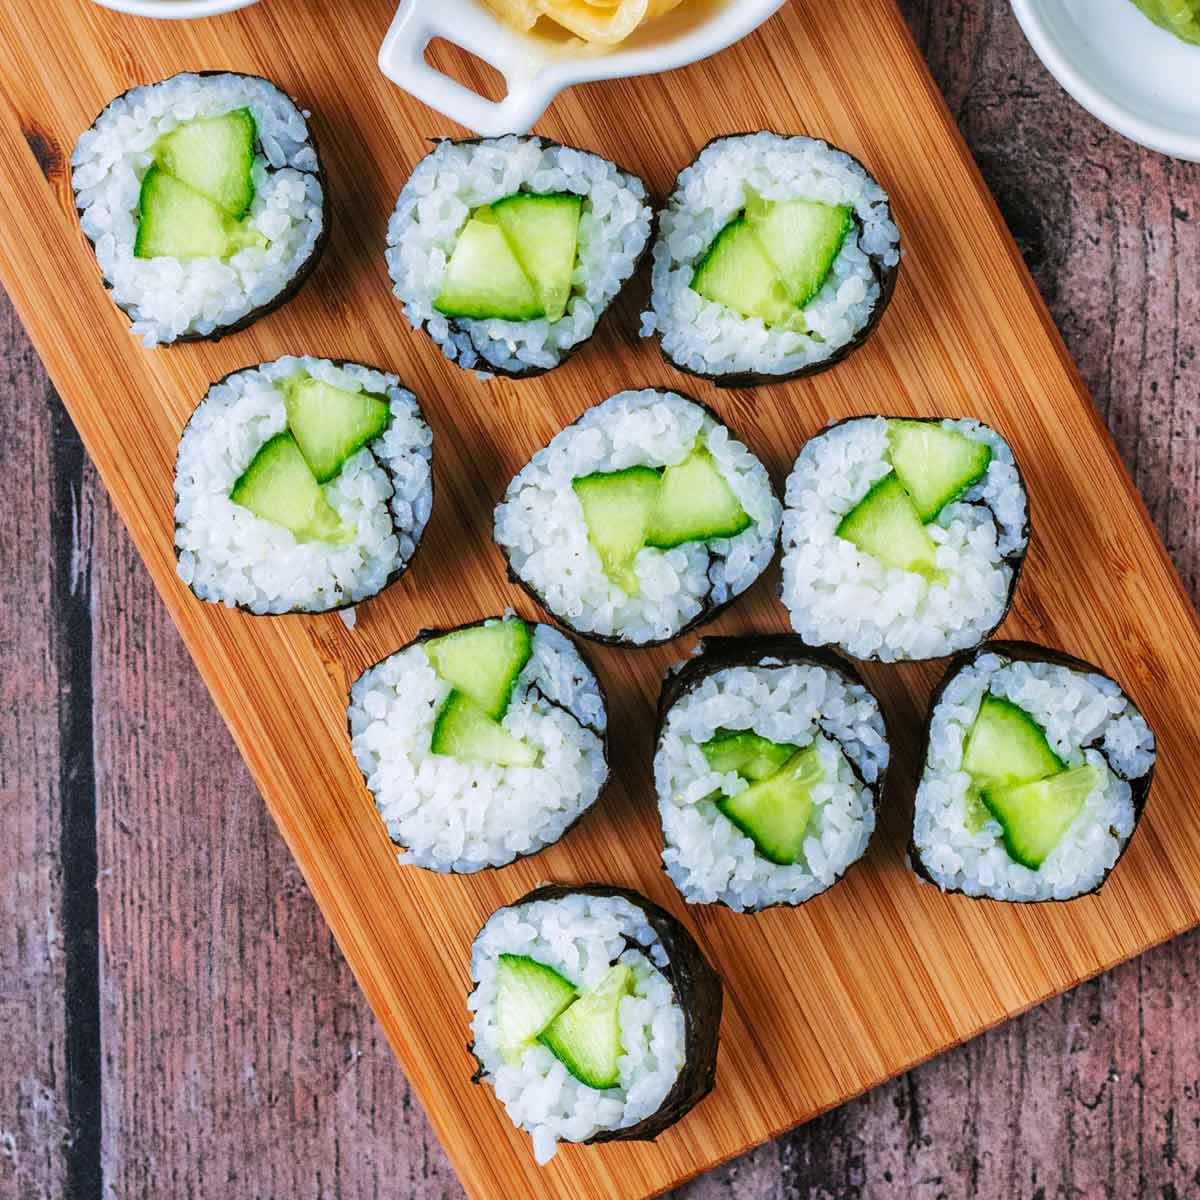 Cucumber  Is there a difference in the ones you can use in your Sushi?